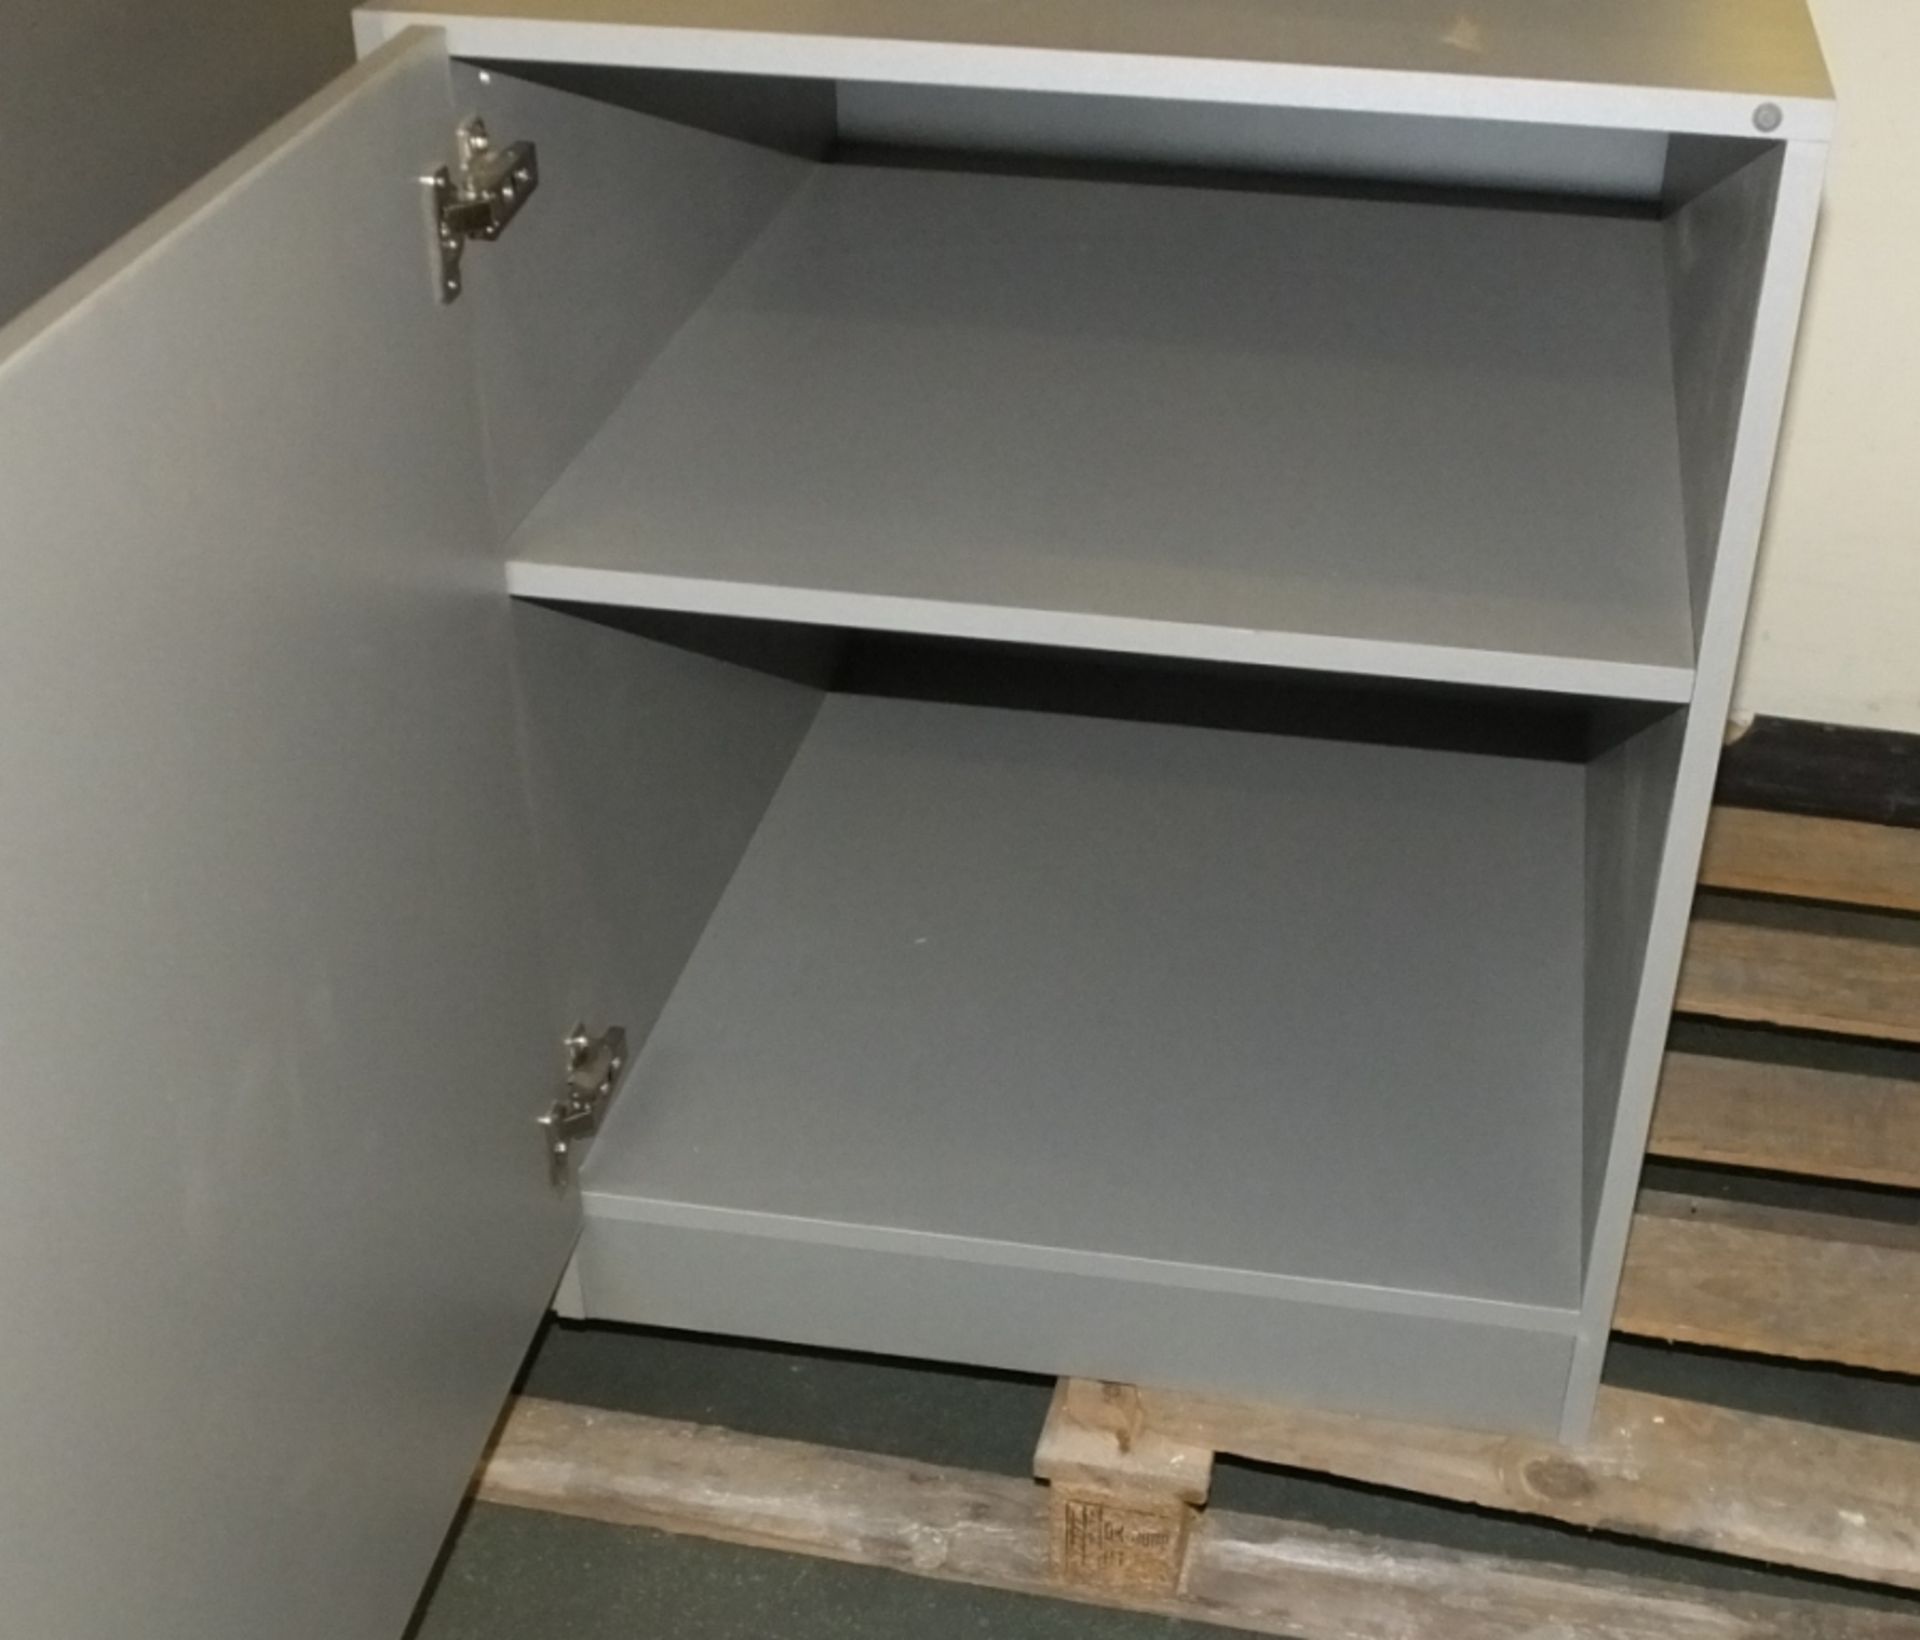 Product display cabinet with under counter cupboard - Image 4 of 4